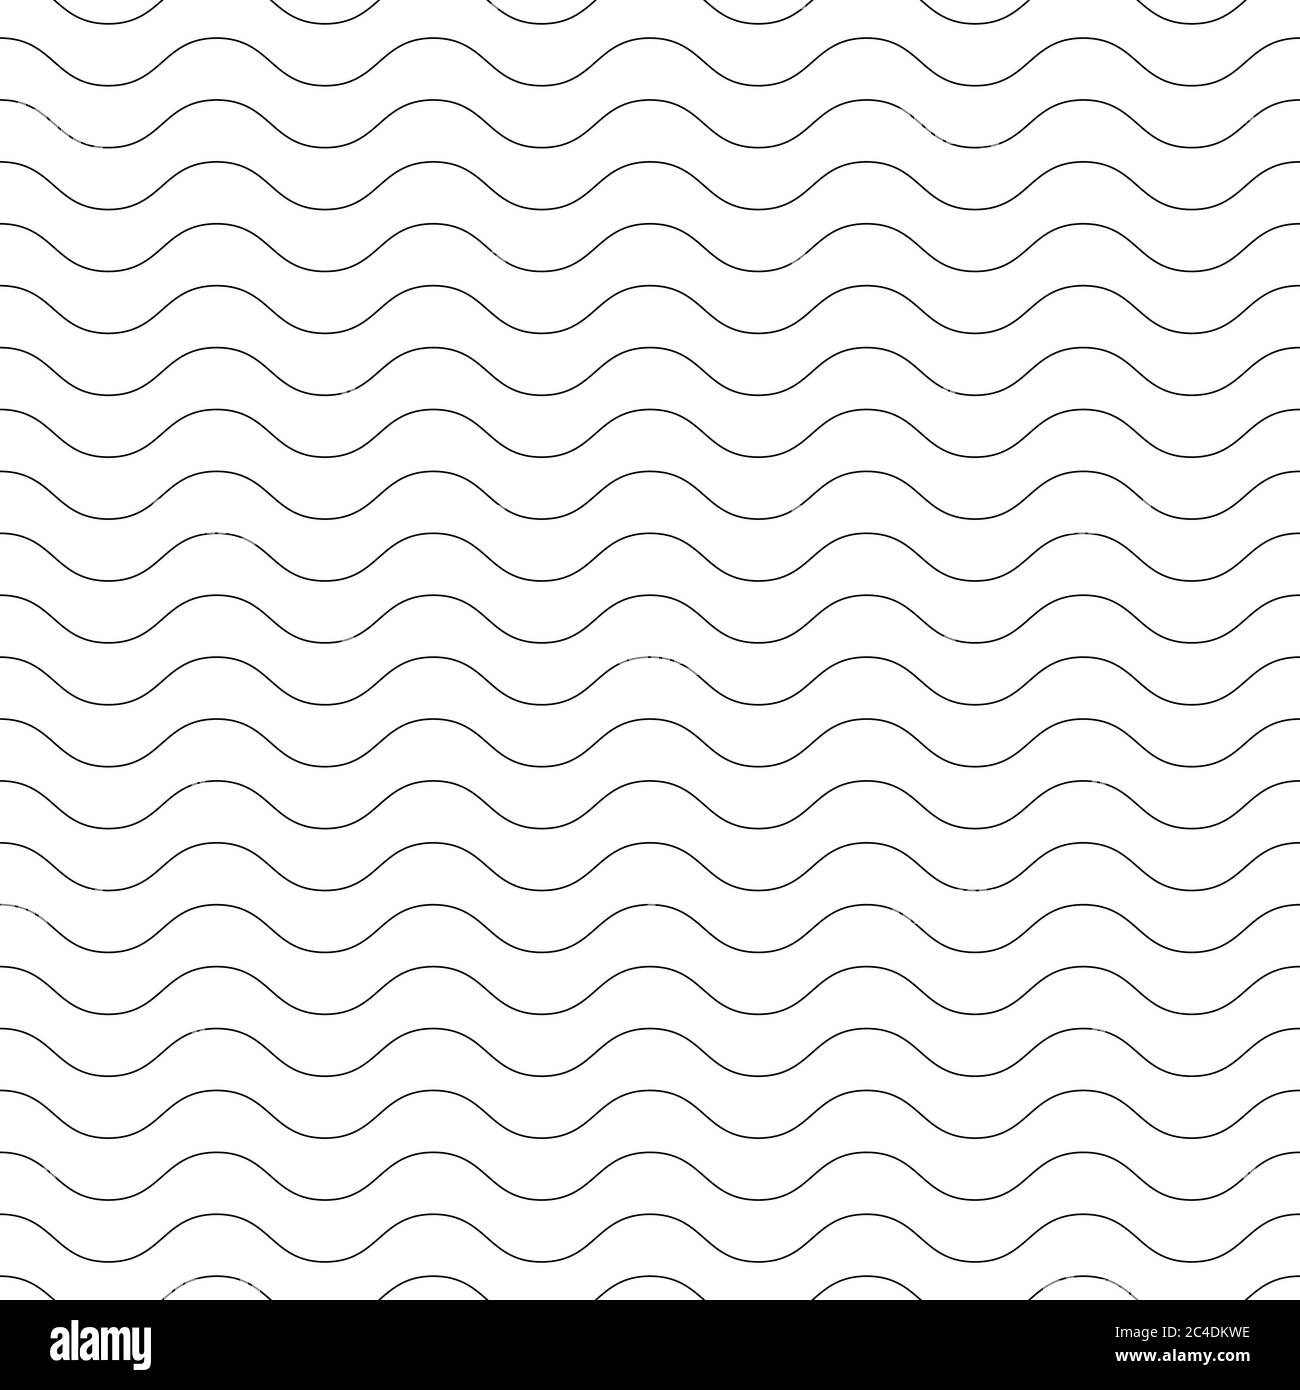 Seamless wavy pattern. Black thin lines on white background. Nautical, naval and water theme. Vector illustration. Stock Vector